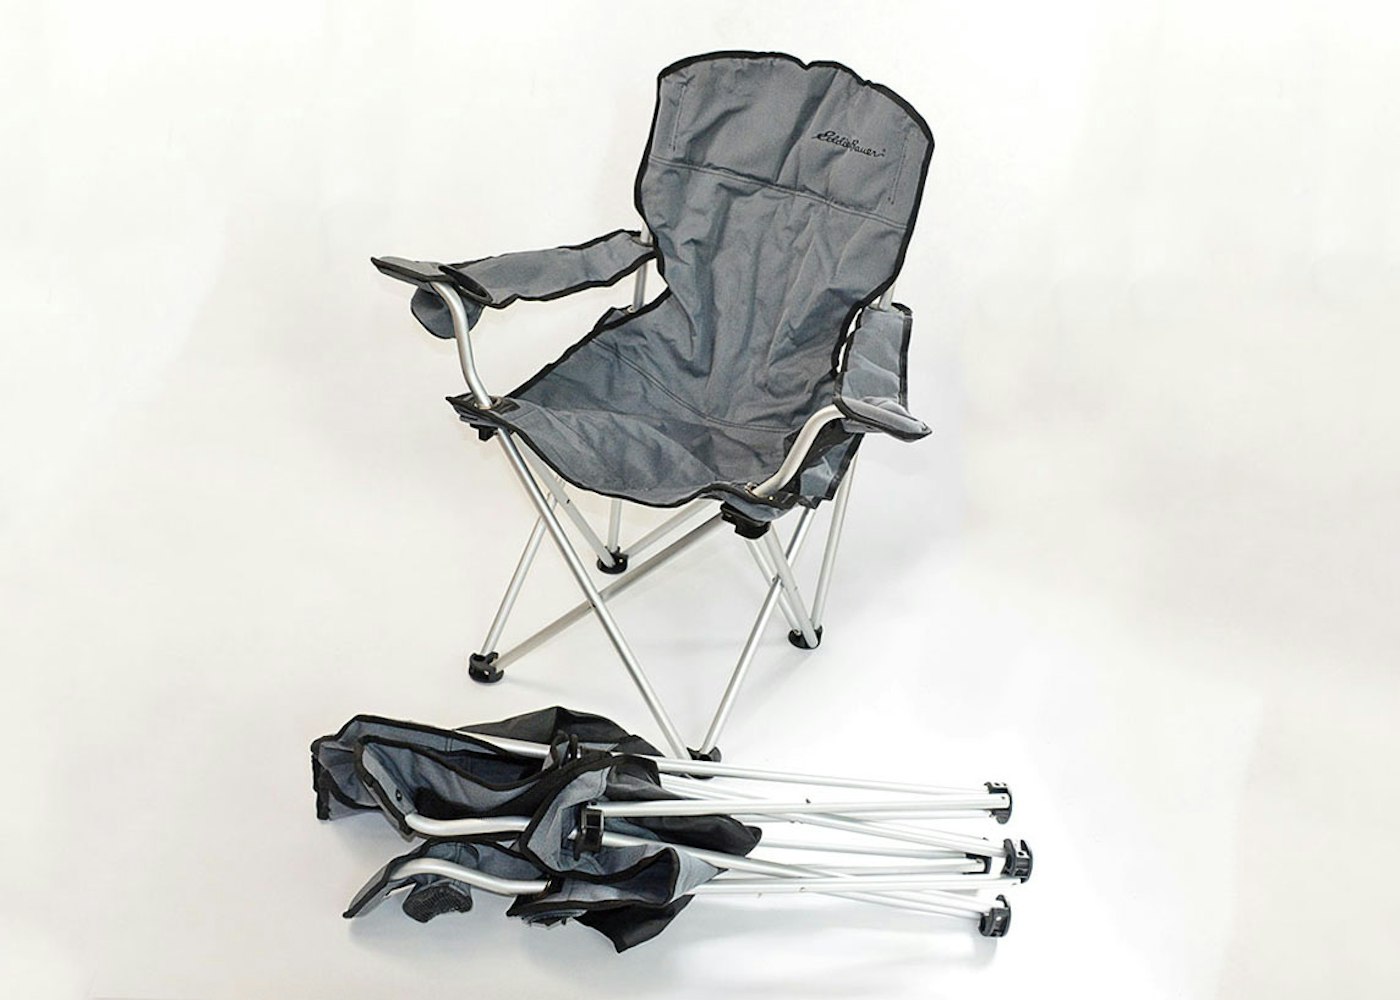 Pair of Camping Chairs by Eddie Bauer | EBTH